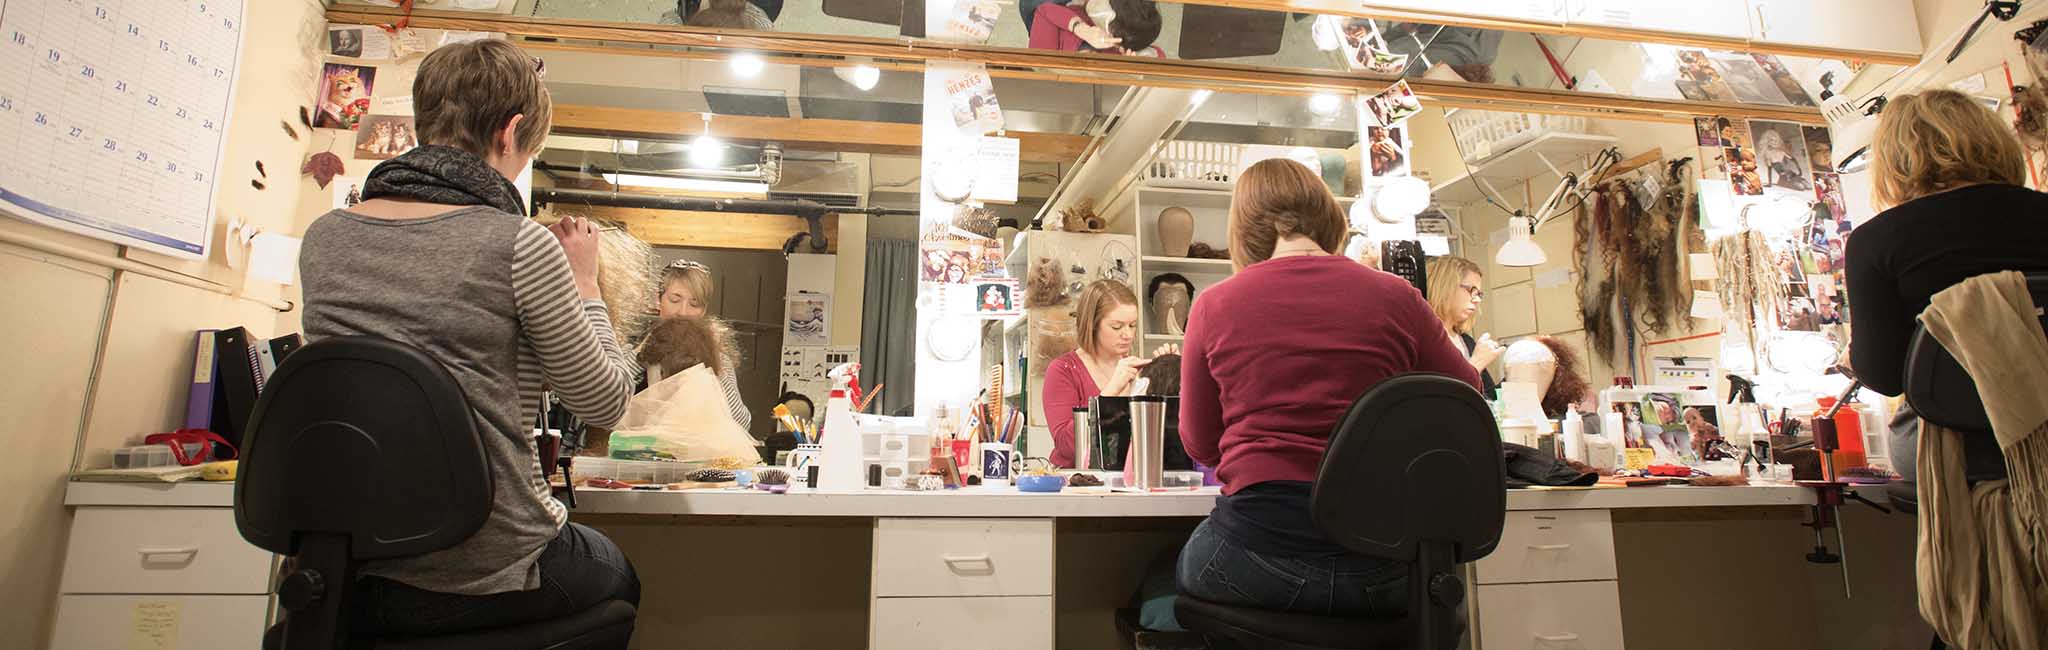 Three people sitting in chairs facing a large mirror working on wigs.